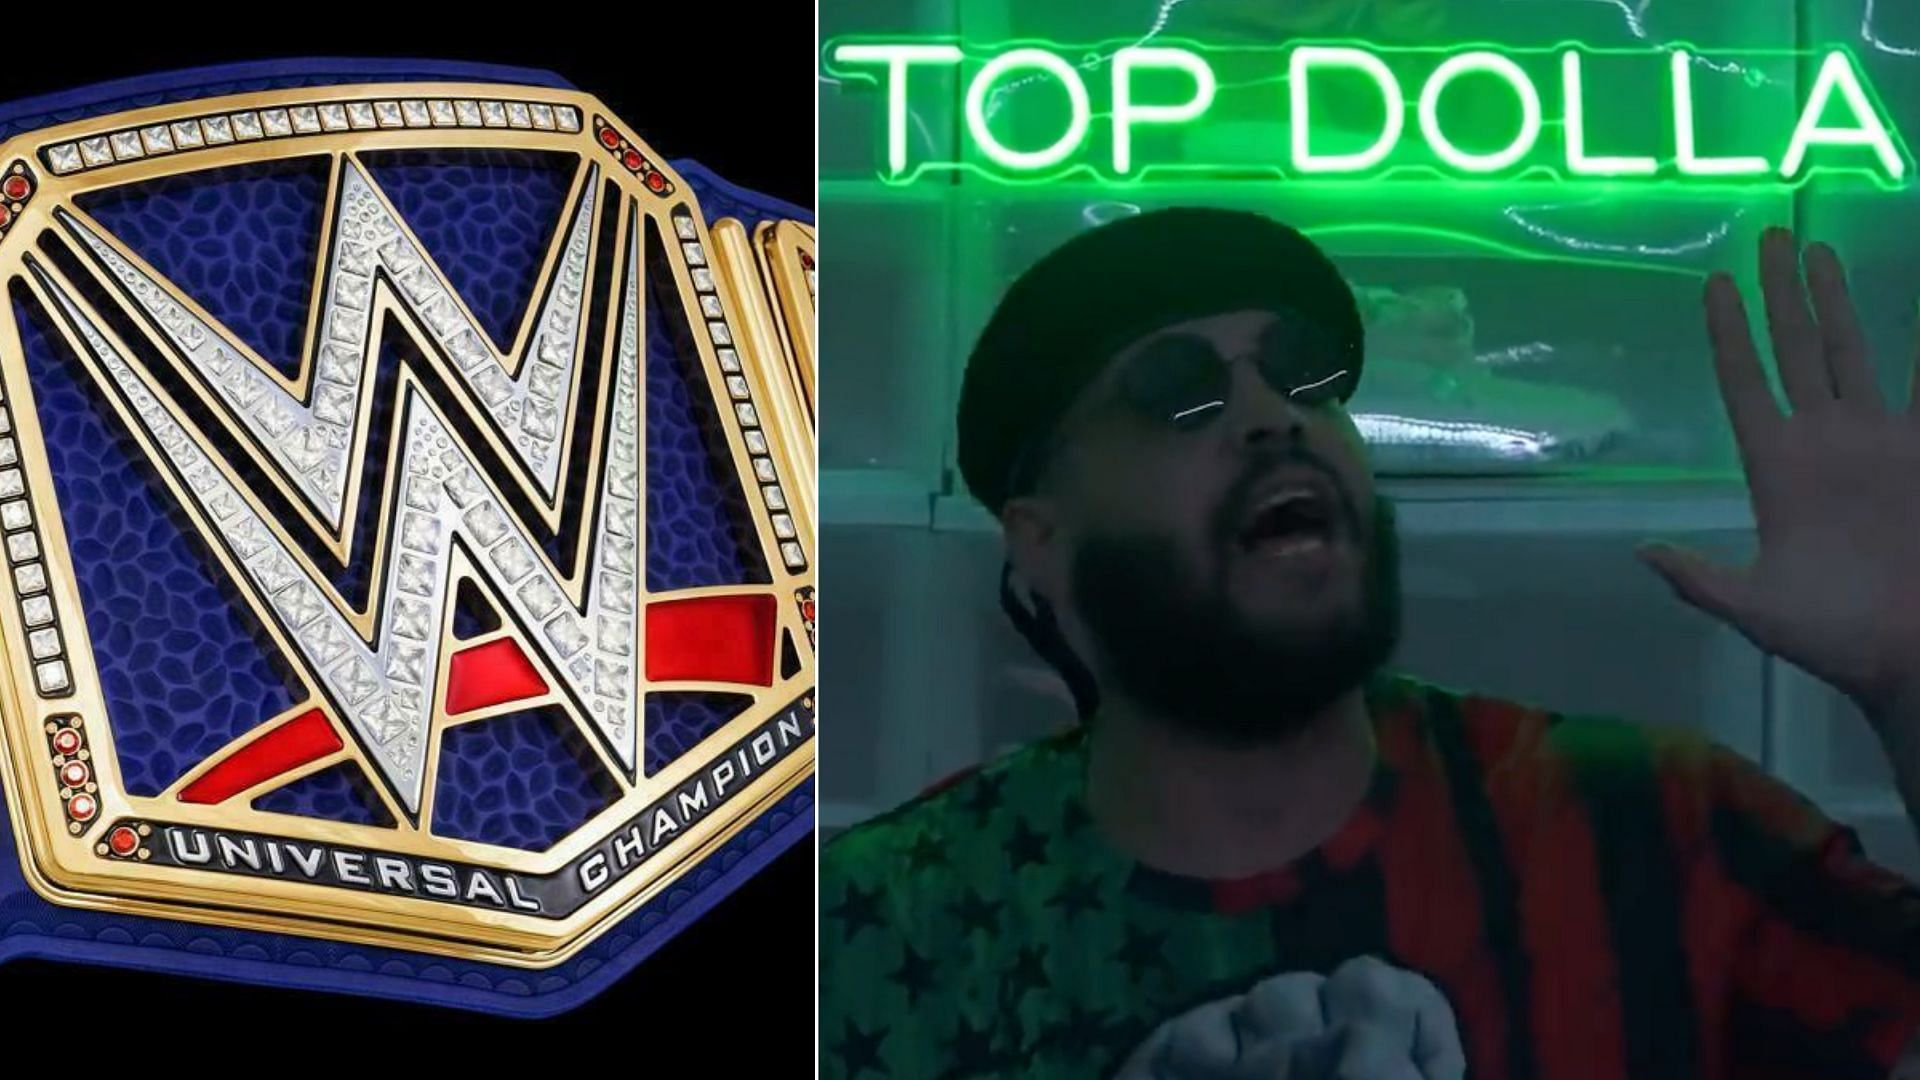 Former champion responds to Top Dolla’s “bald-headed conspiracy” claims about WWE SmackDown tournament